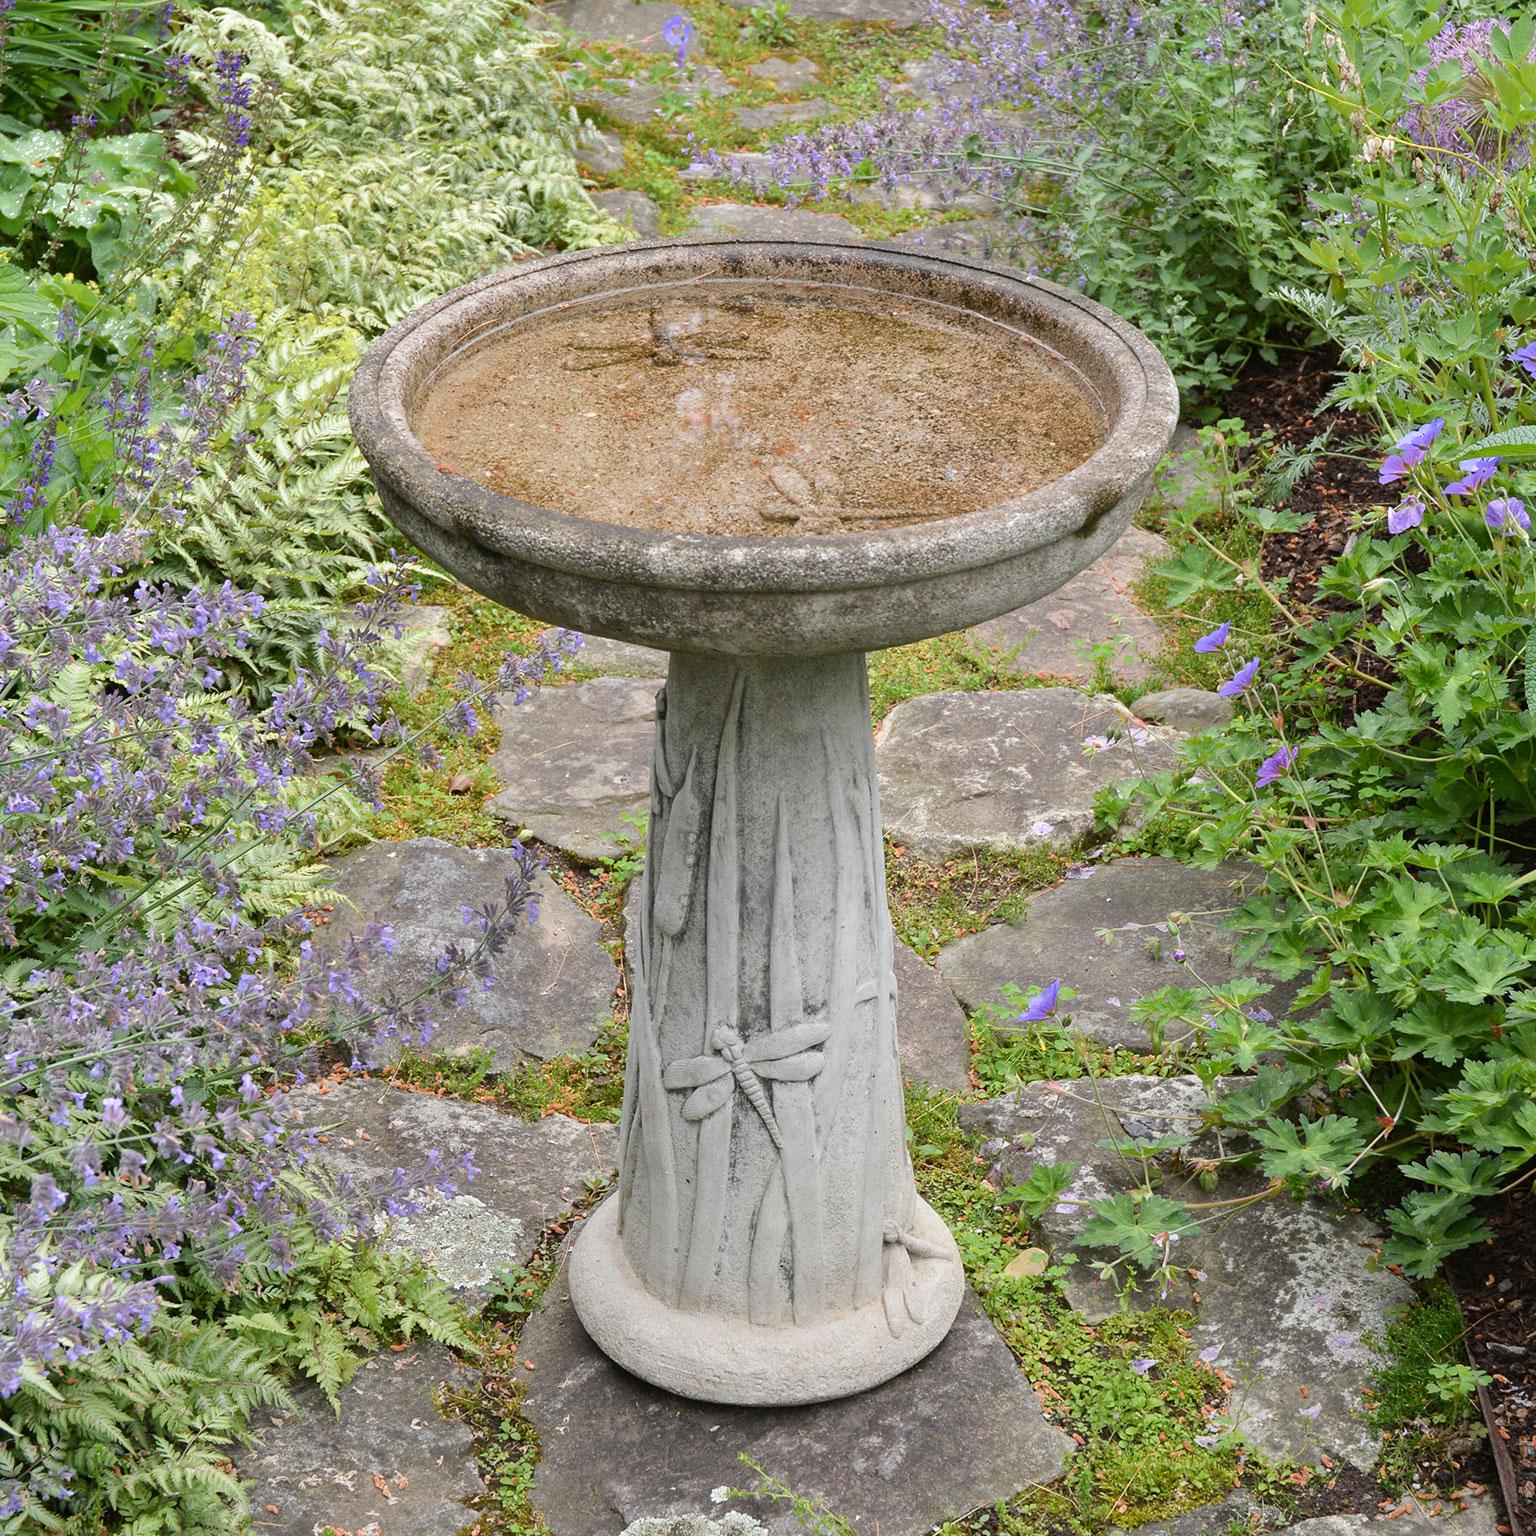 A composition stone birdbath with cattail and dragonfly motif on pedestal and in bowl.